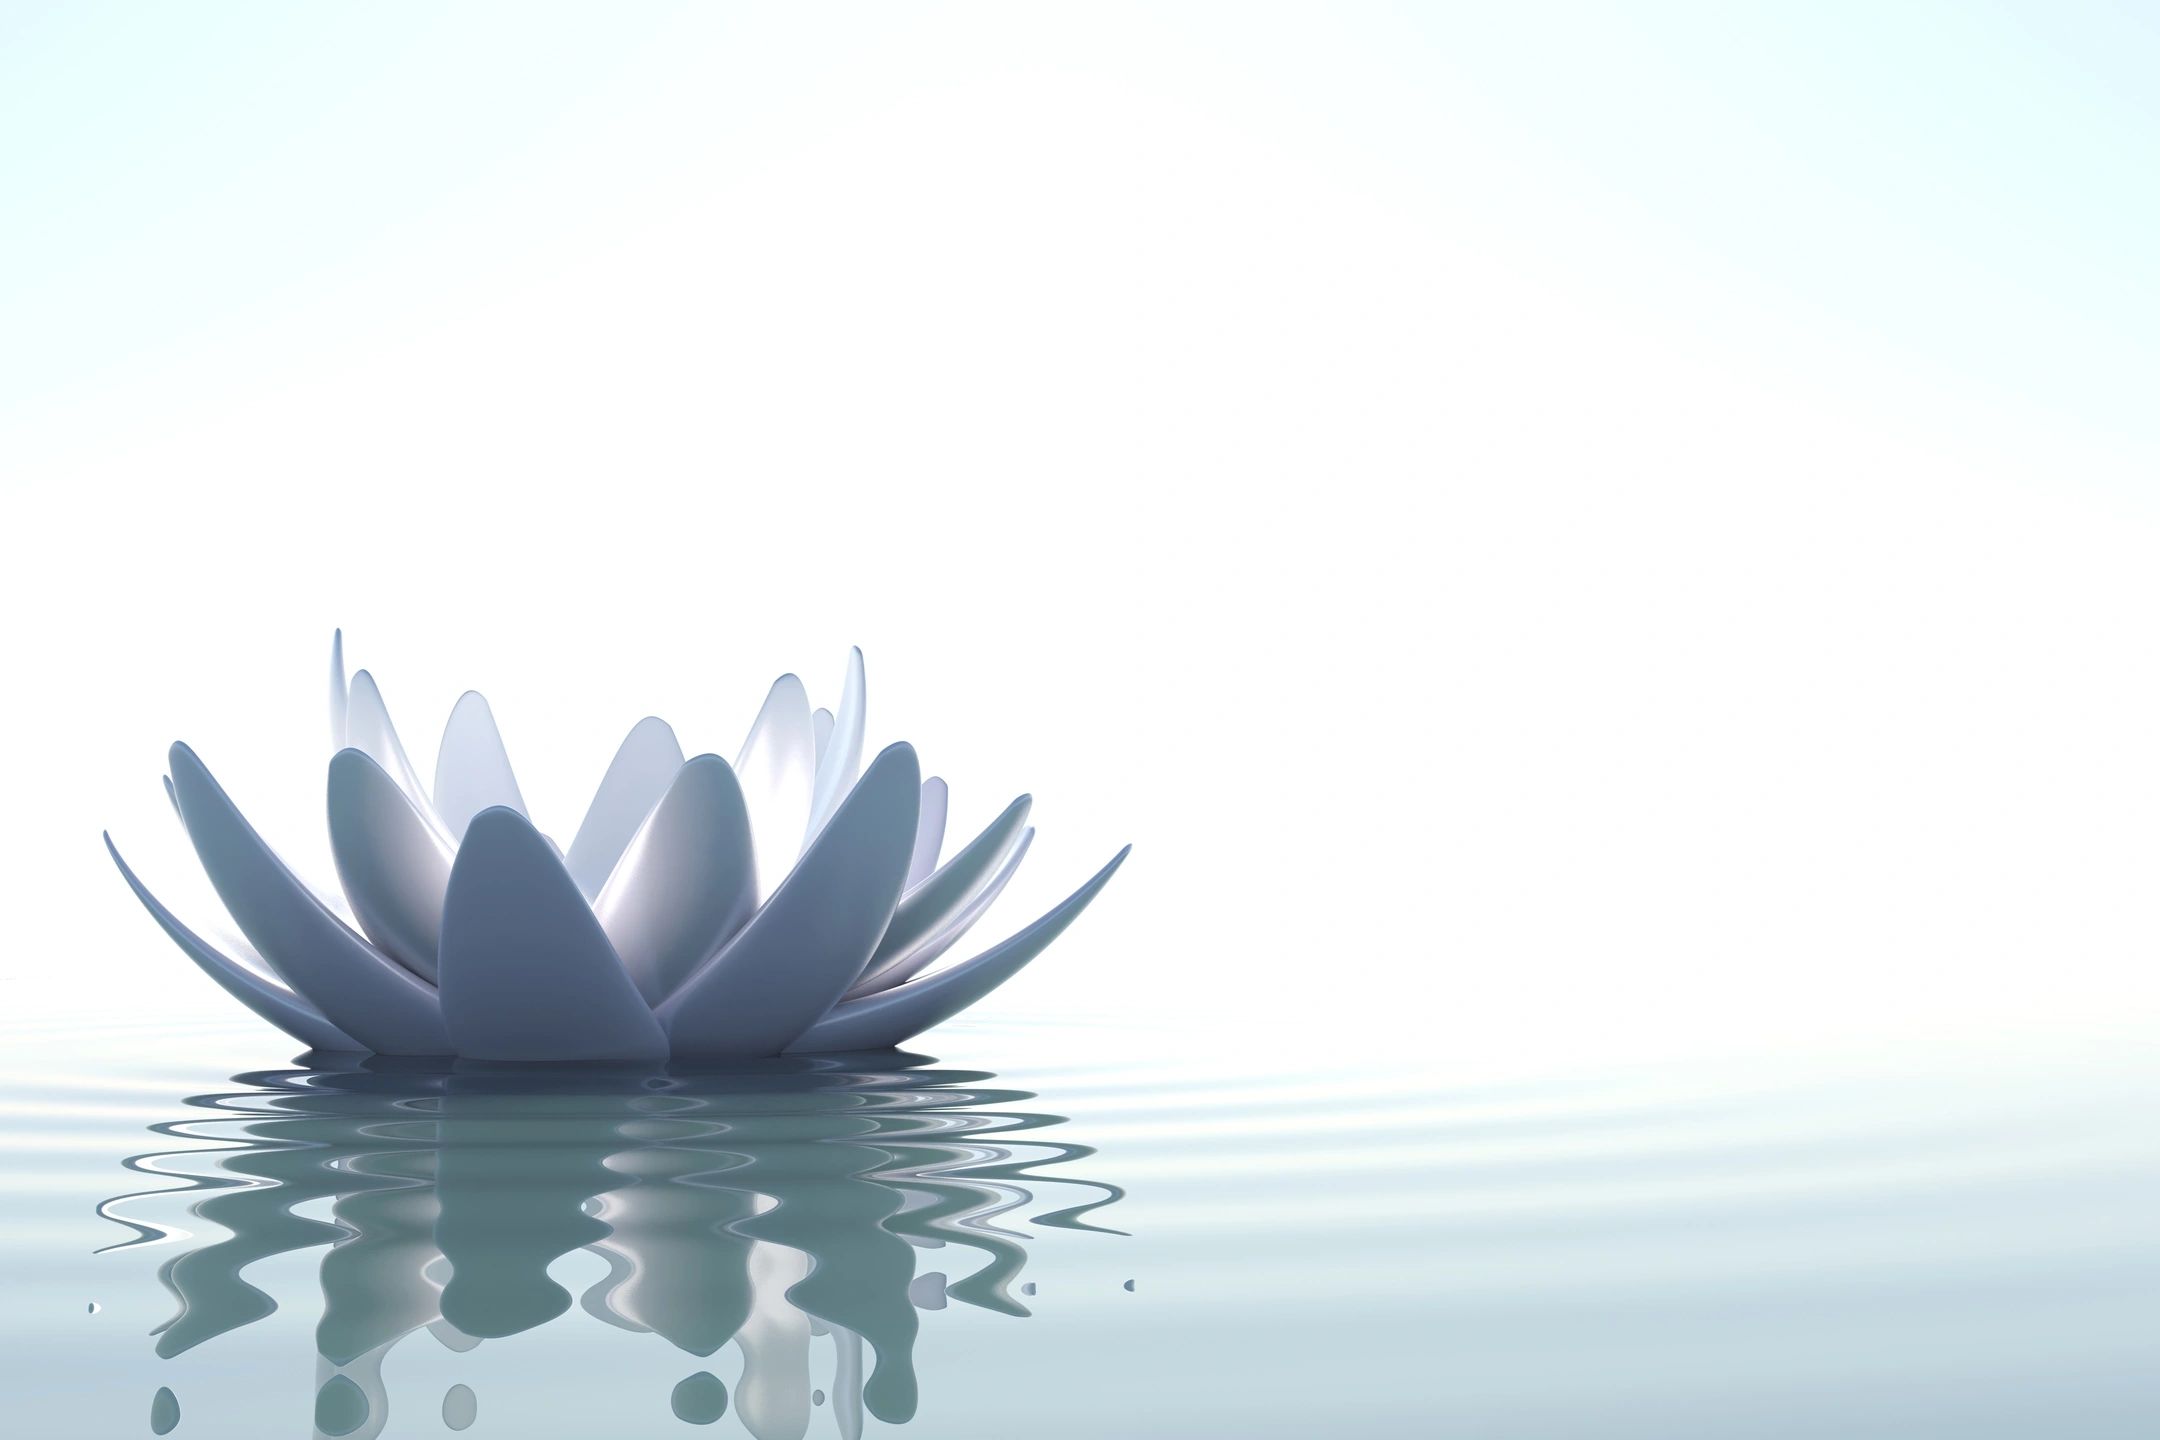 A serene image of a white lotus flower resting on calm water, symbolizing the peace found through mental health treatment at Khiron Clinics. The lotus petals are open, their reflection visible on the water's surface with gentle ripples surrounding the flower. The soft gradient of light blue and white creates a tranquil atmosphere.